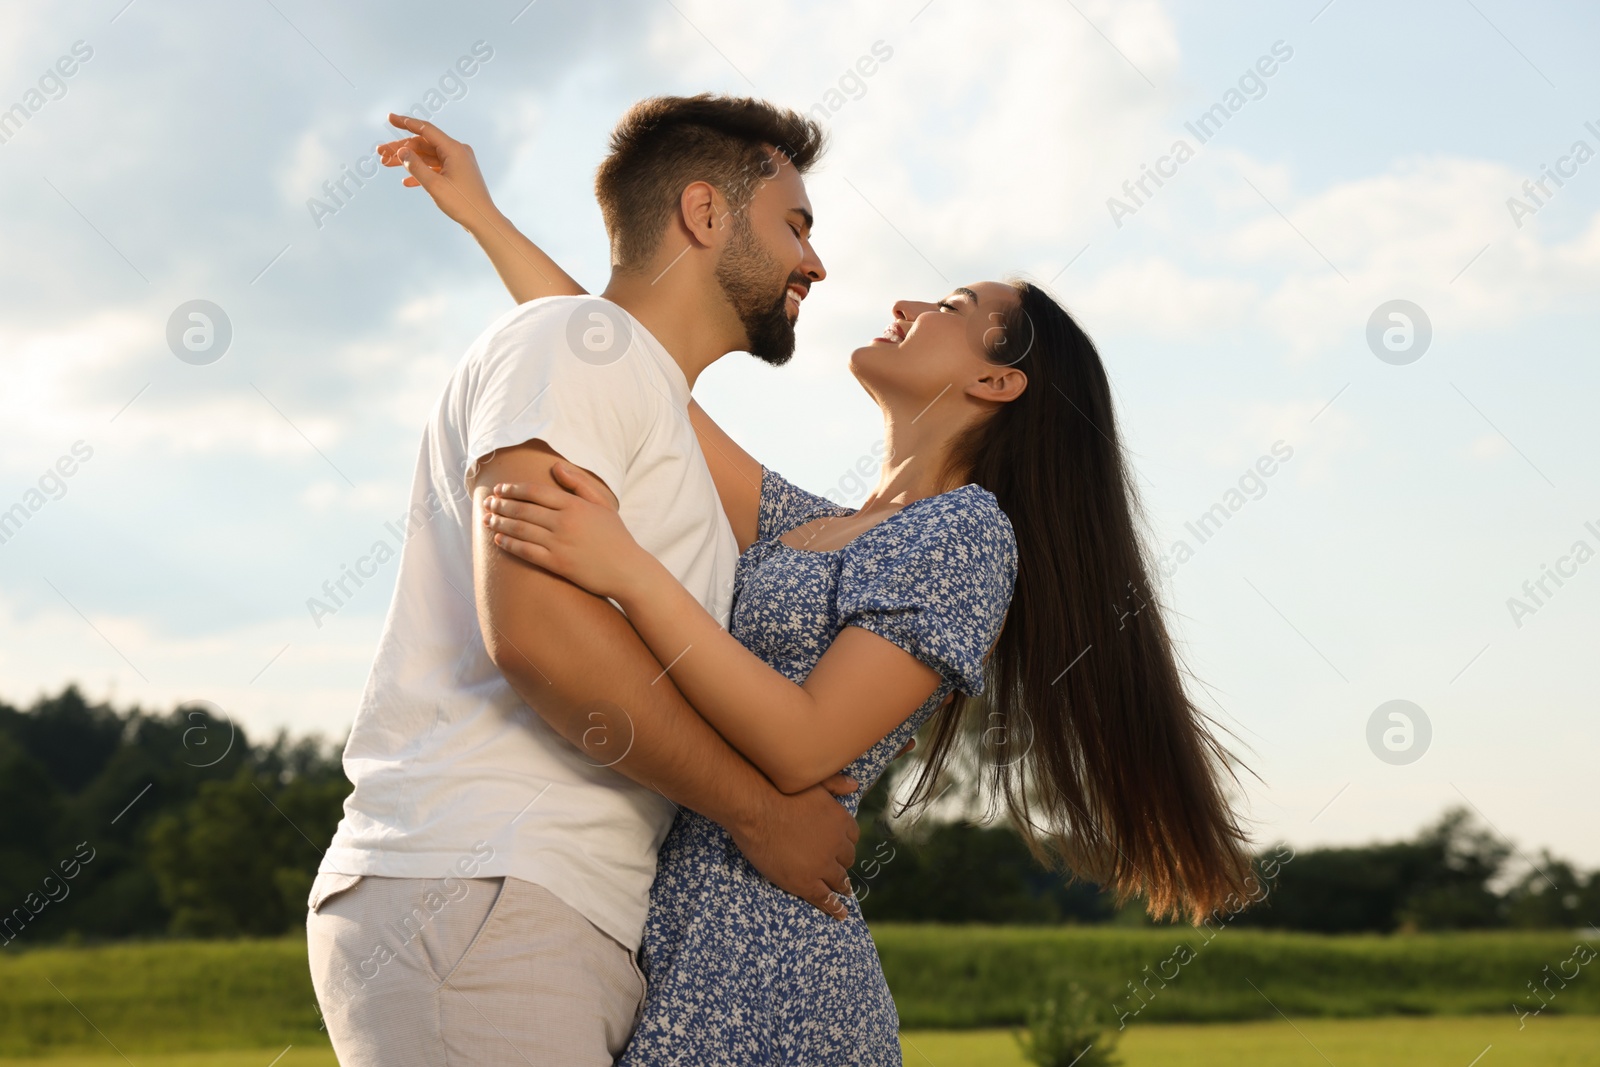 Photo of Romantic date. Beautiful couple spending time together outdoors